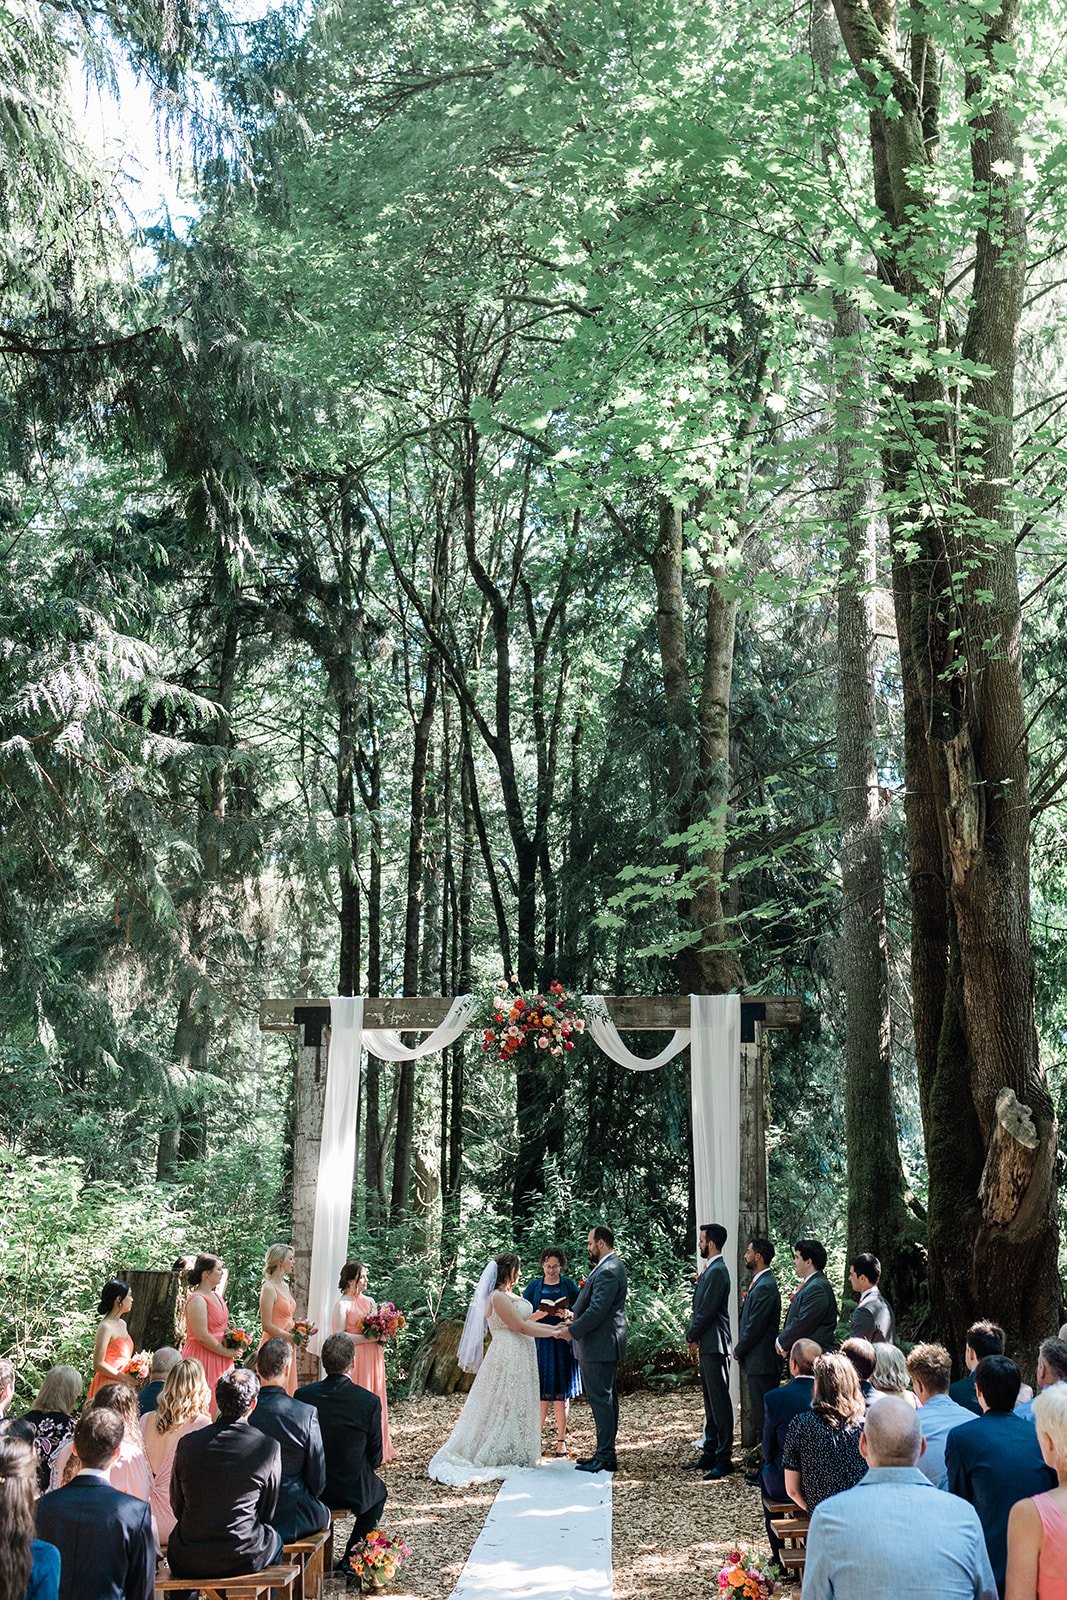 Outdoor Wedding in the Woods at Twin Willow Gardens